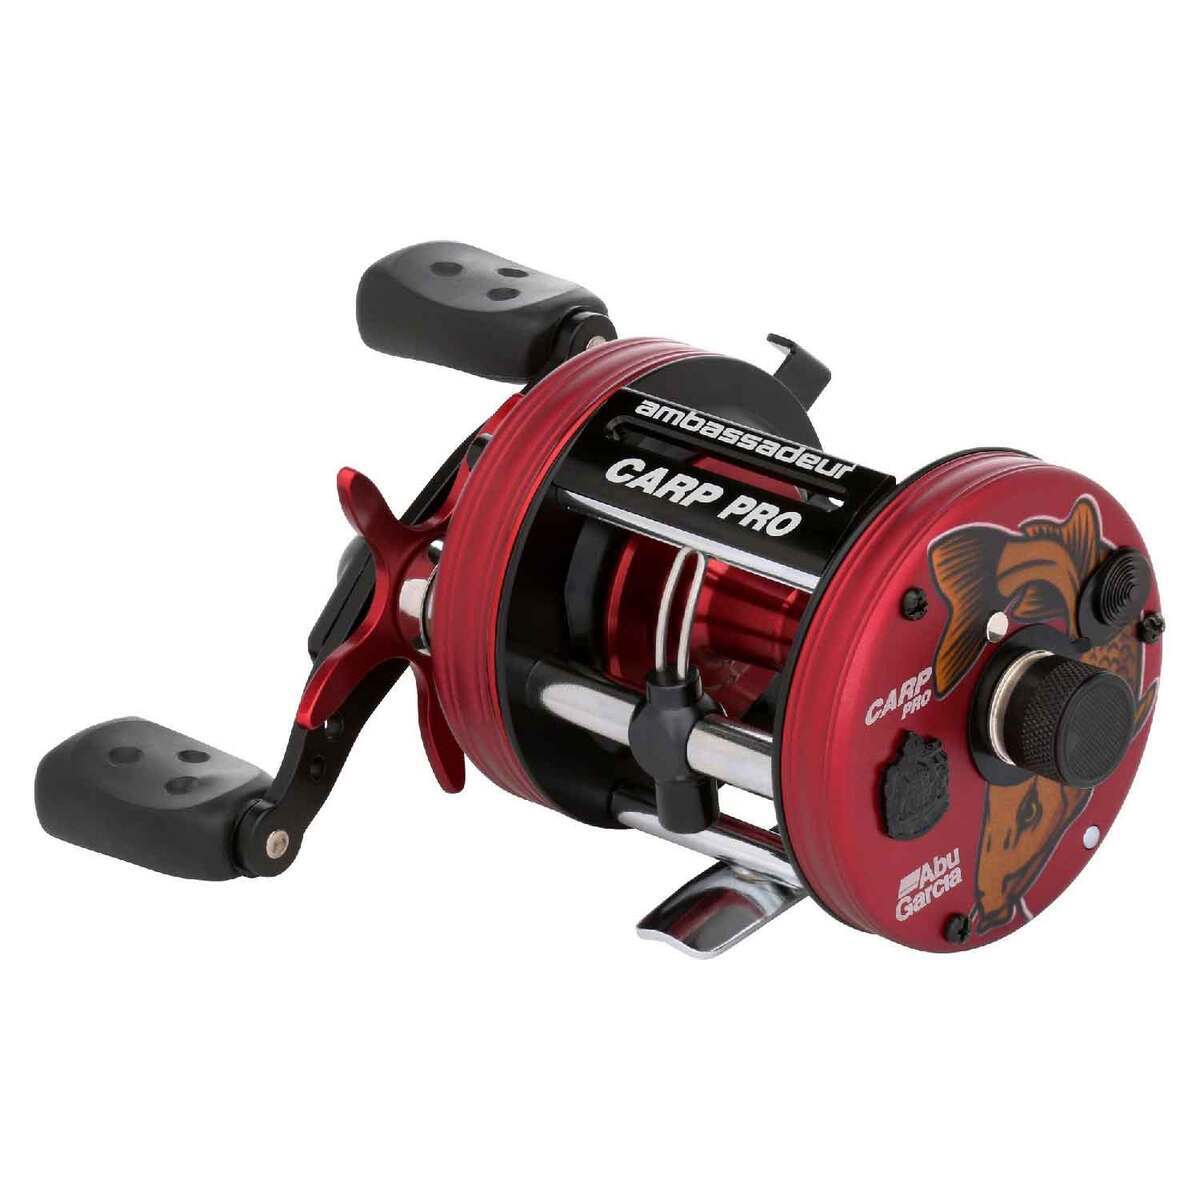 How can you care a baitcaster reel with Abu Garcia maintenance kit